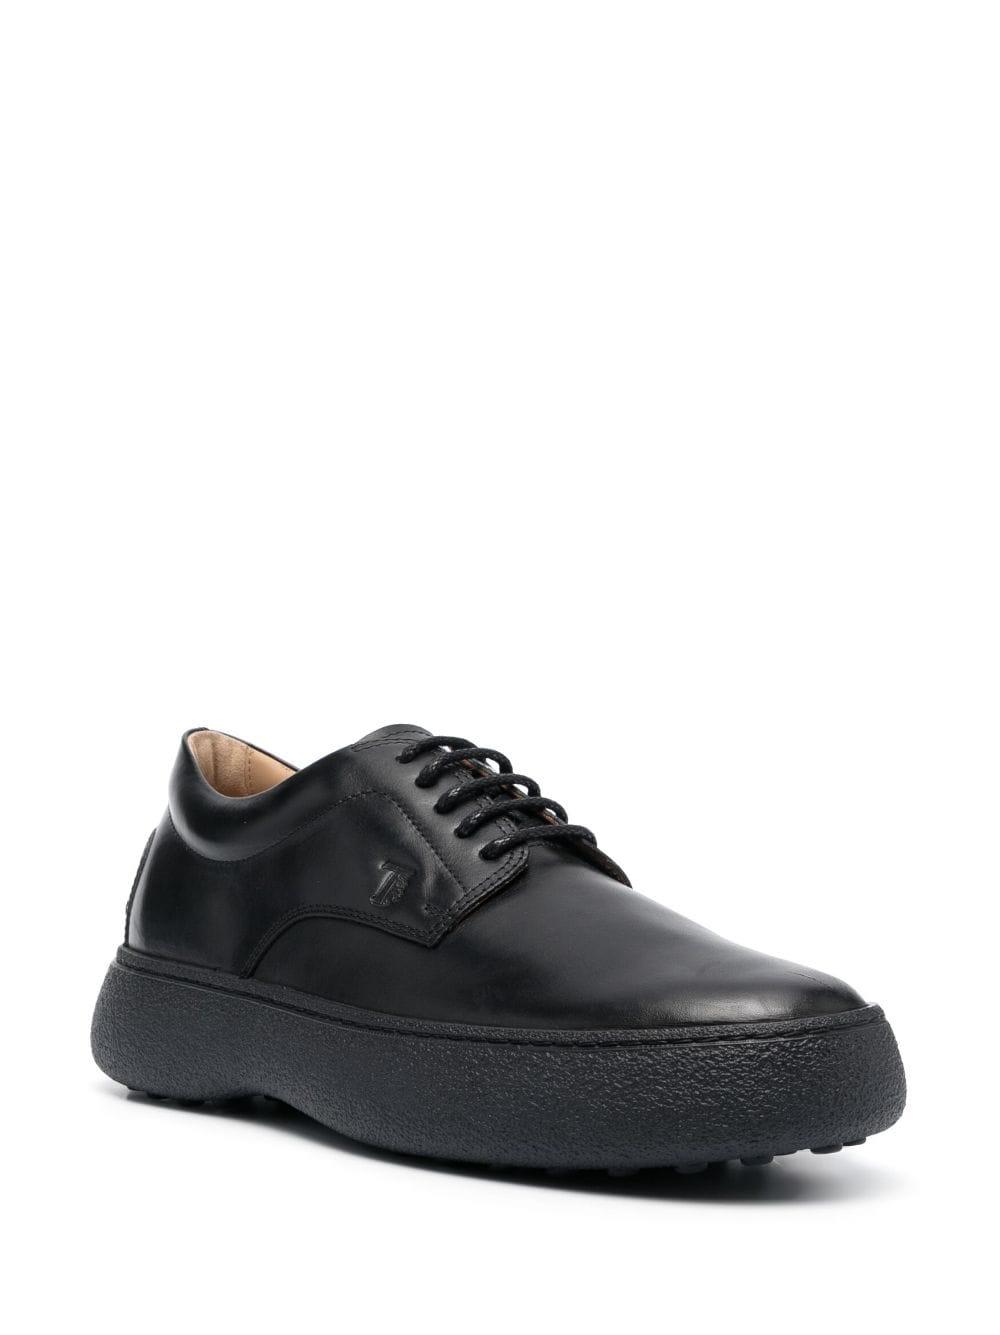 Tod's round-toe leather oxford shoes - Black